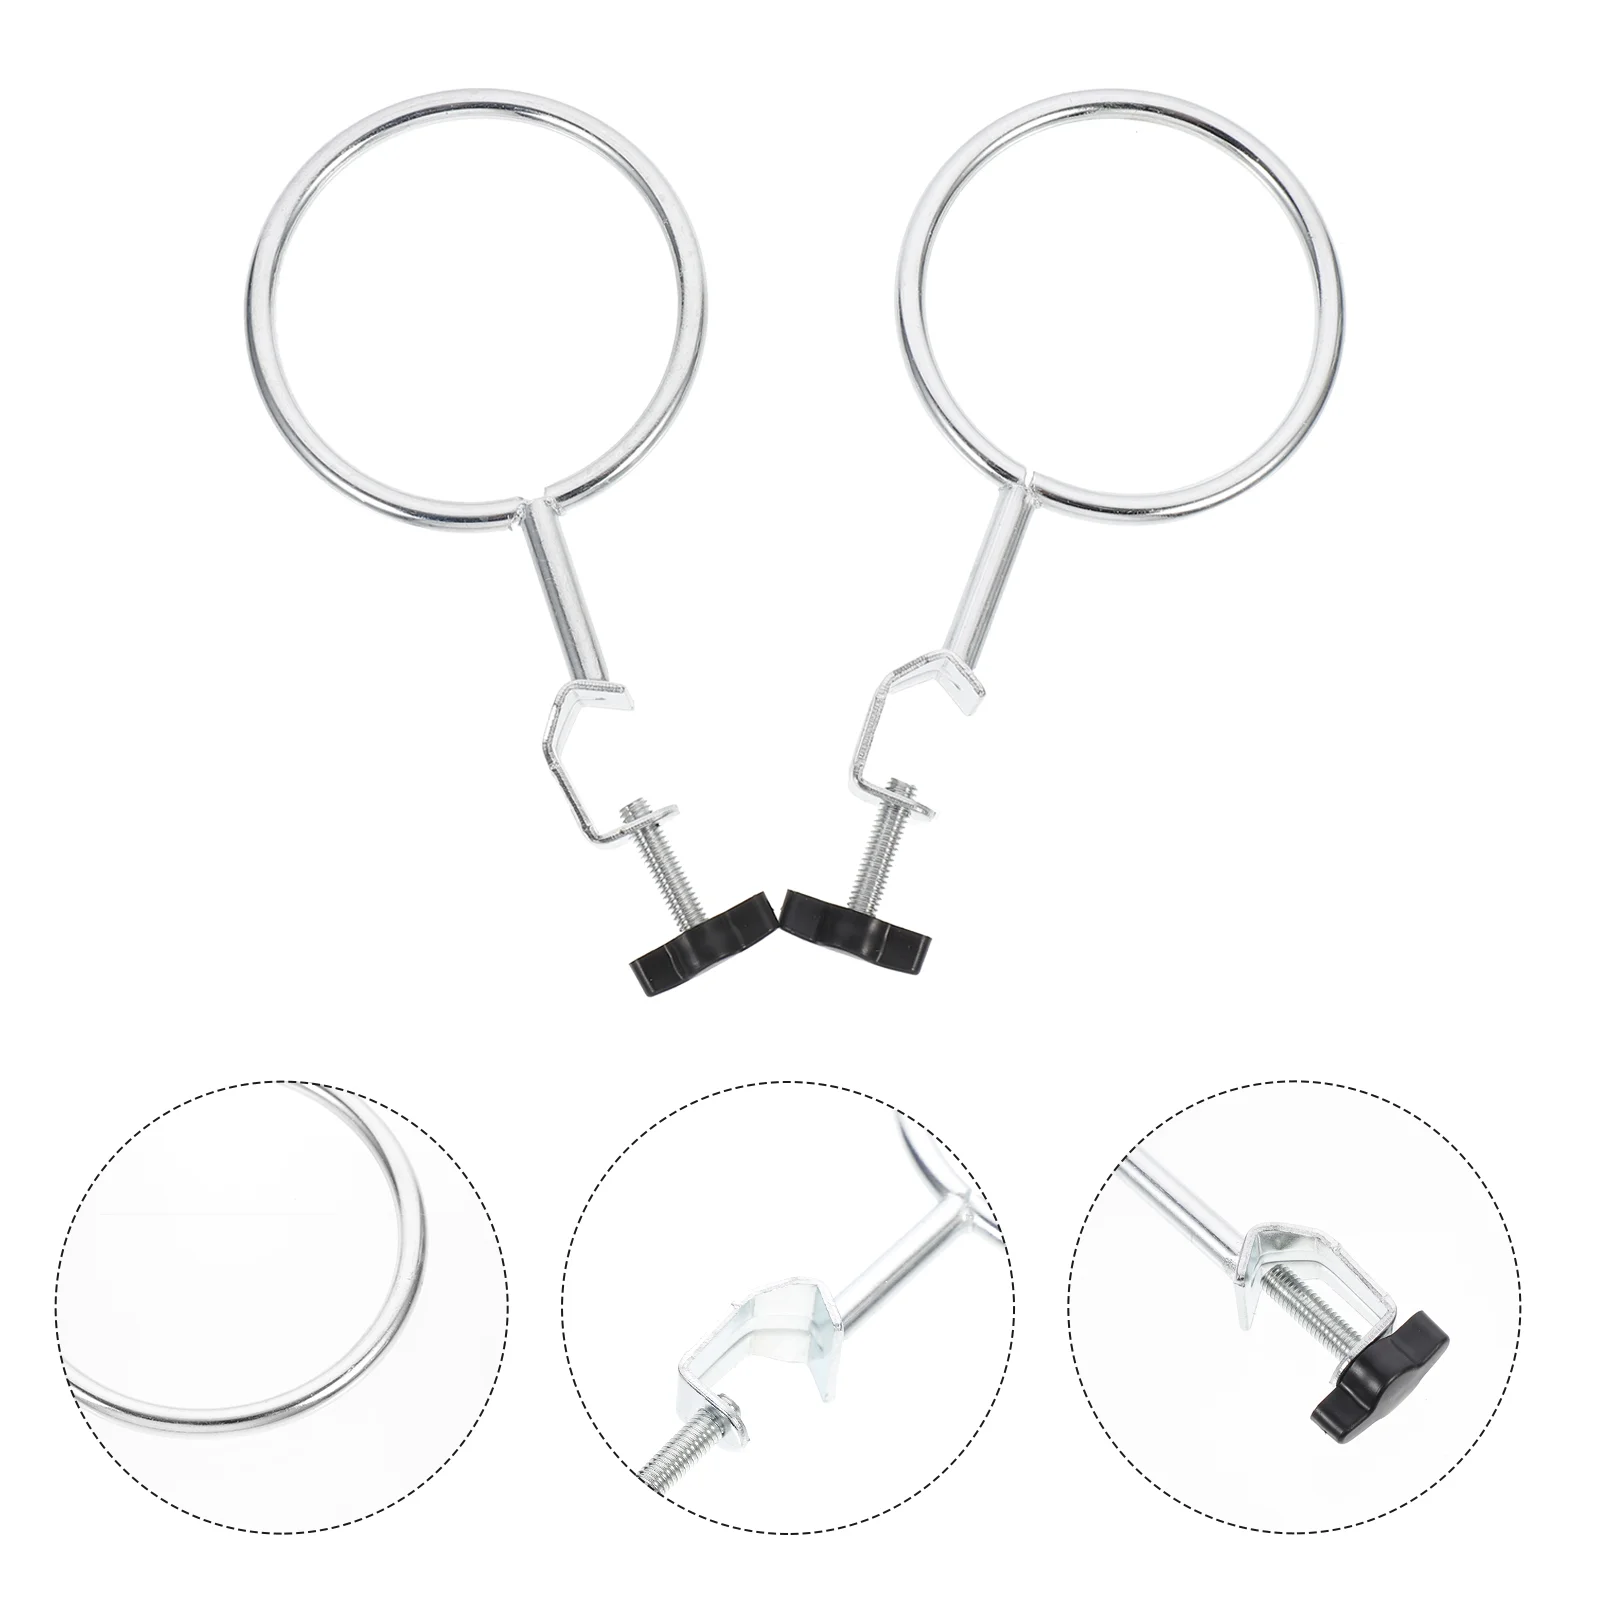 

2 Pcs Hoop The Ring Laboratory Experiment Iron Rings Equipment Beakers Support Supports Corrosion Resistant Sturdy Flask Retort